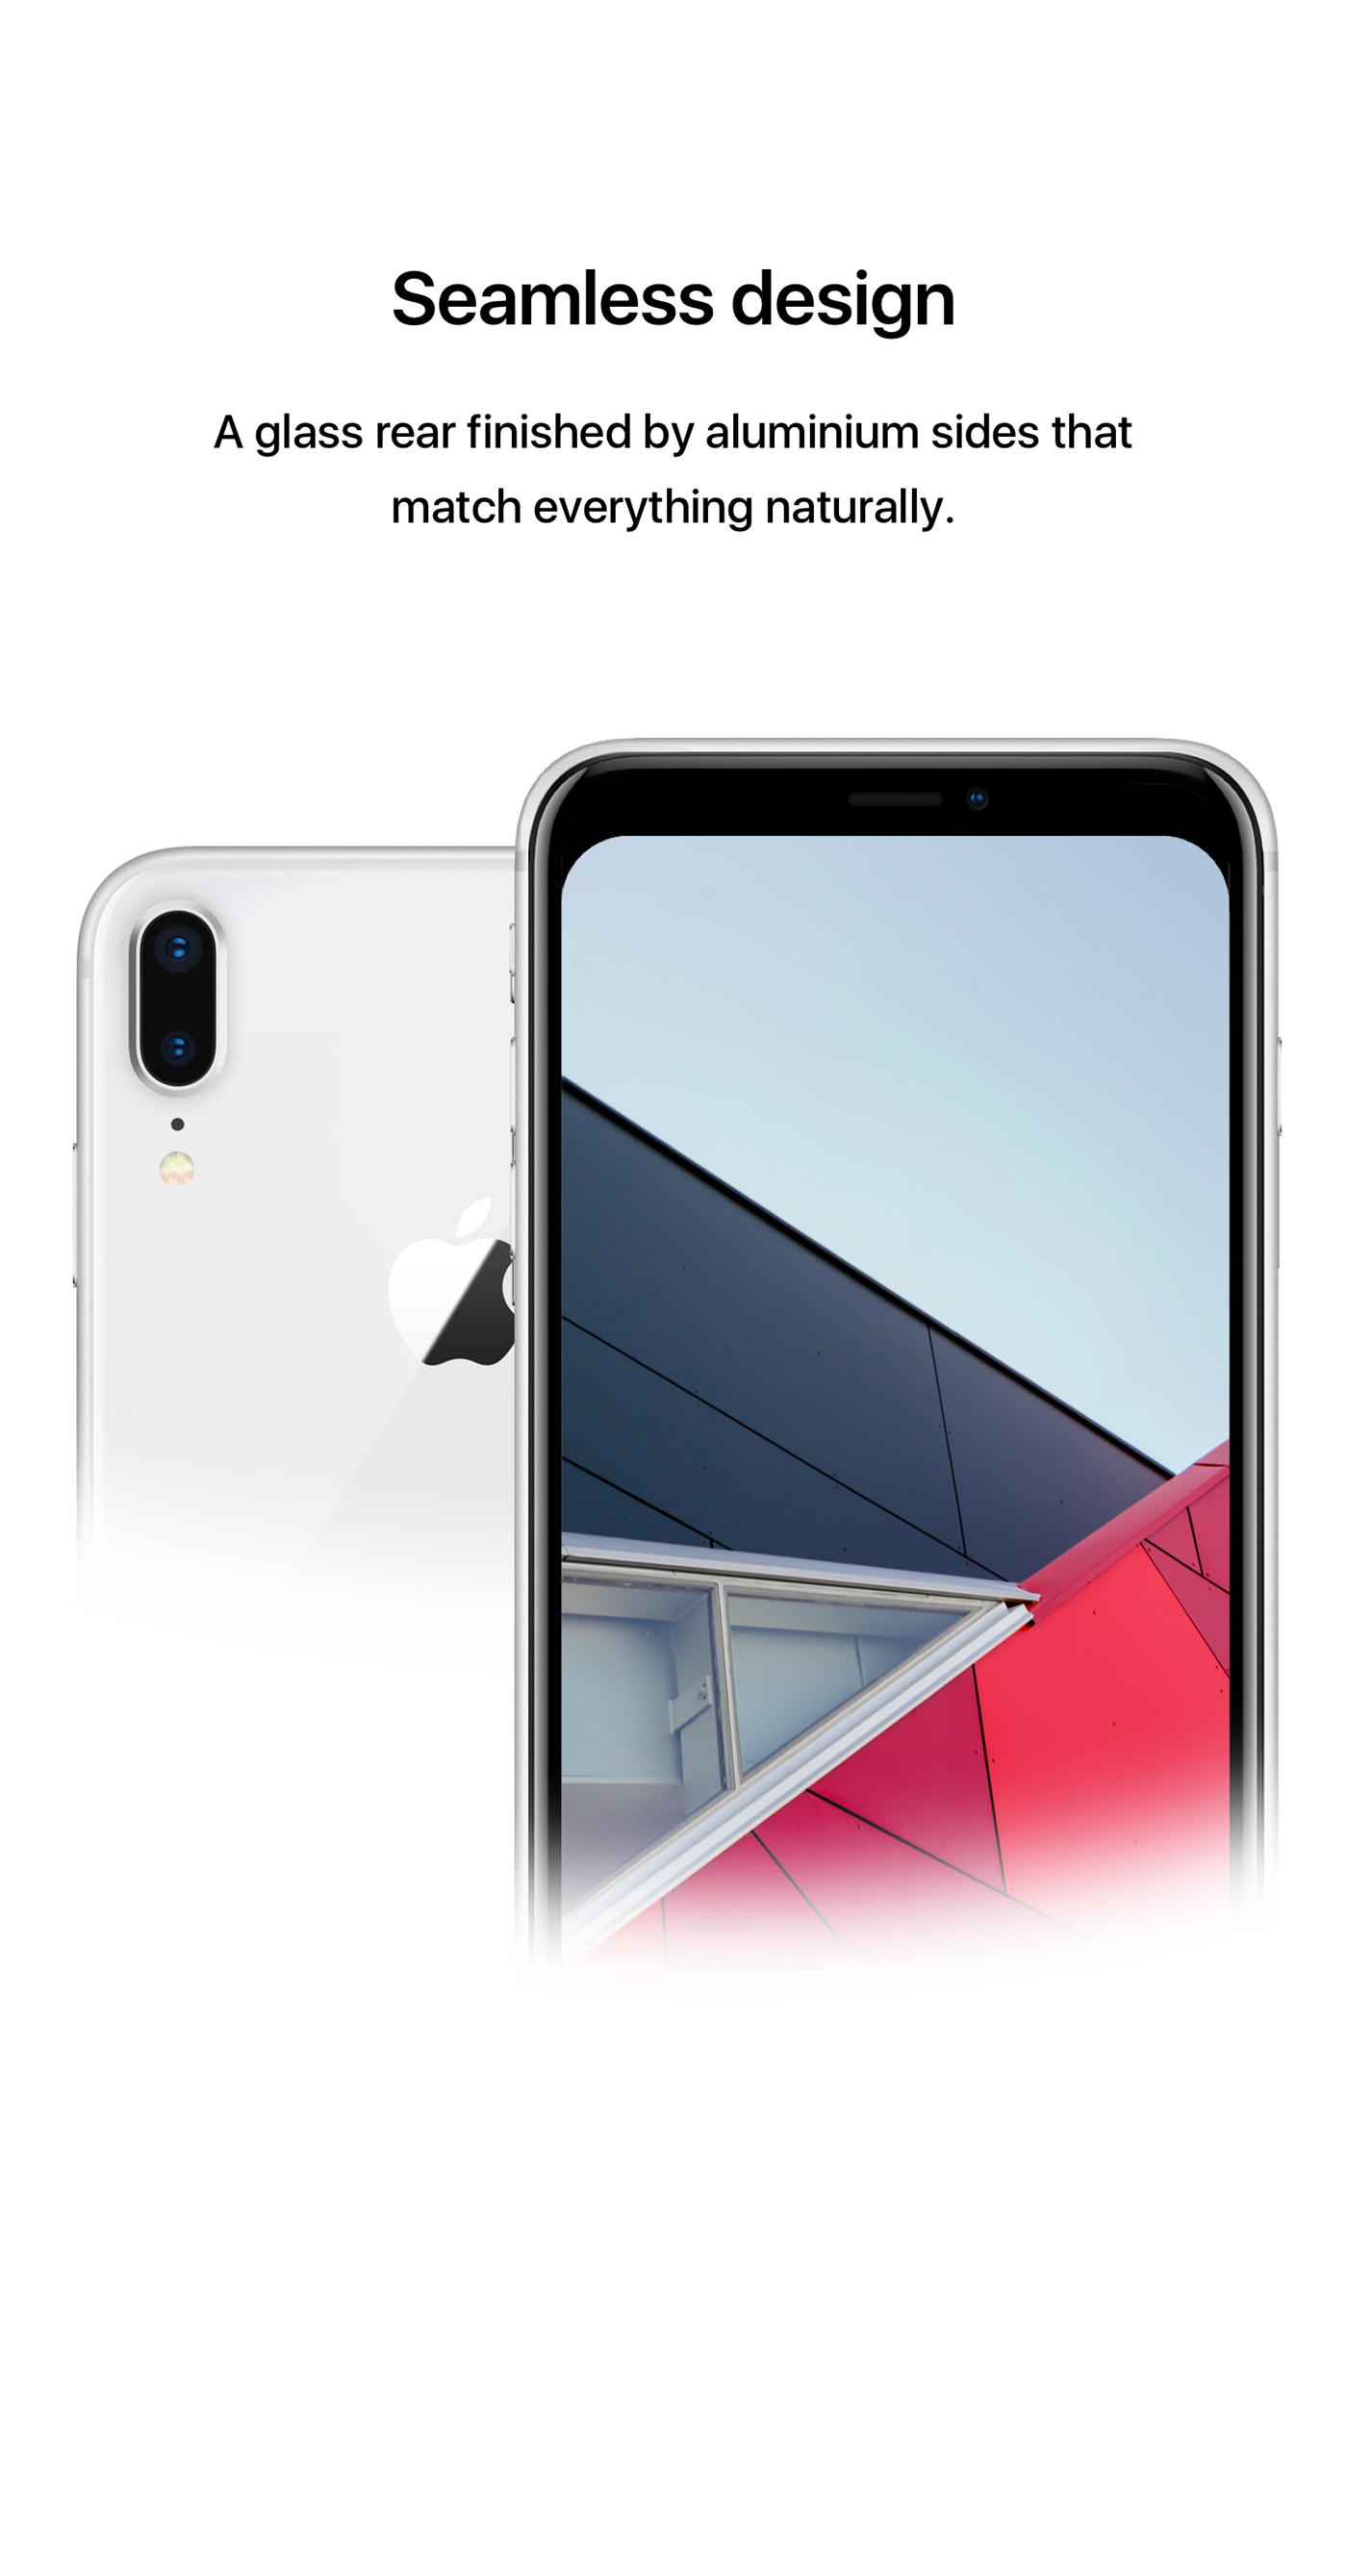 iphone 10 iPhone x concept iphone concept